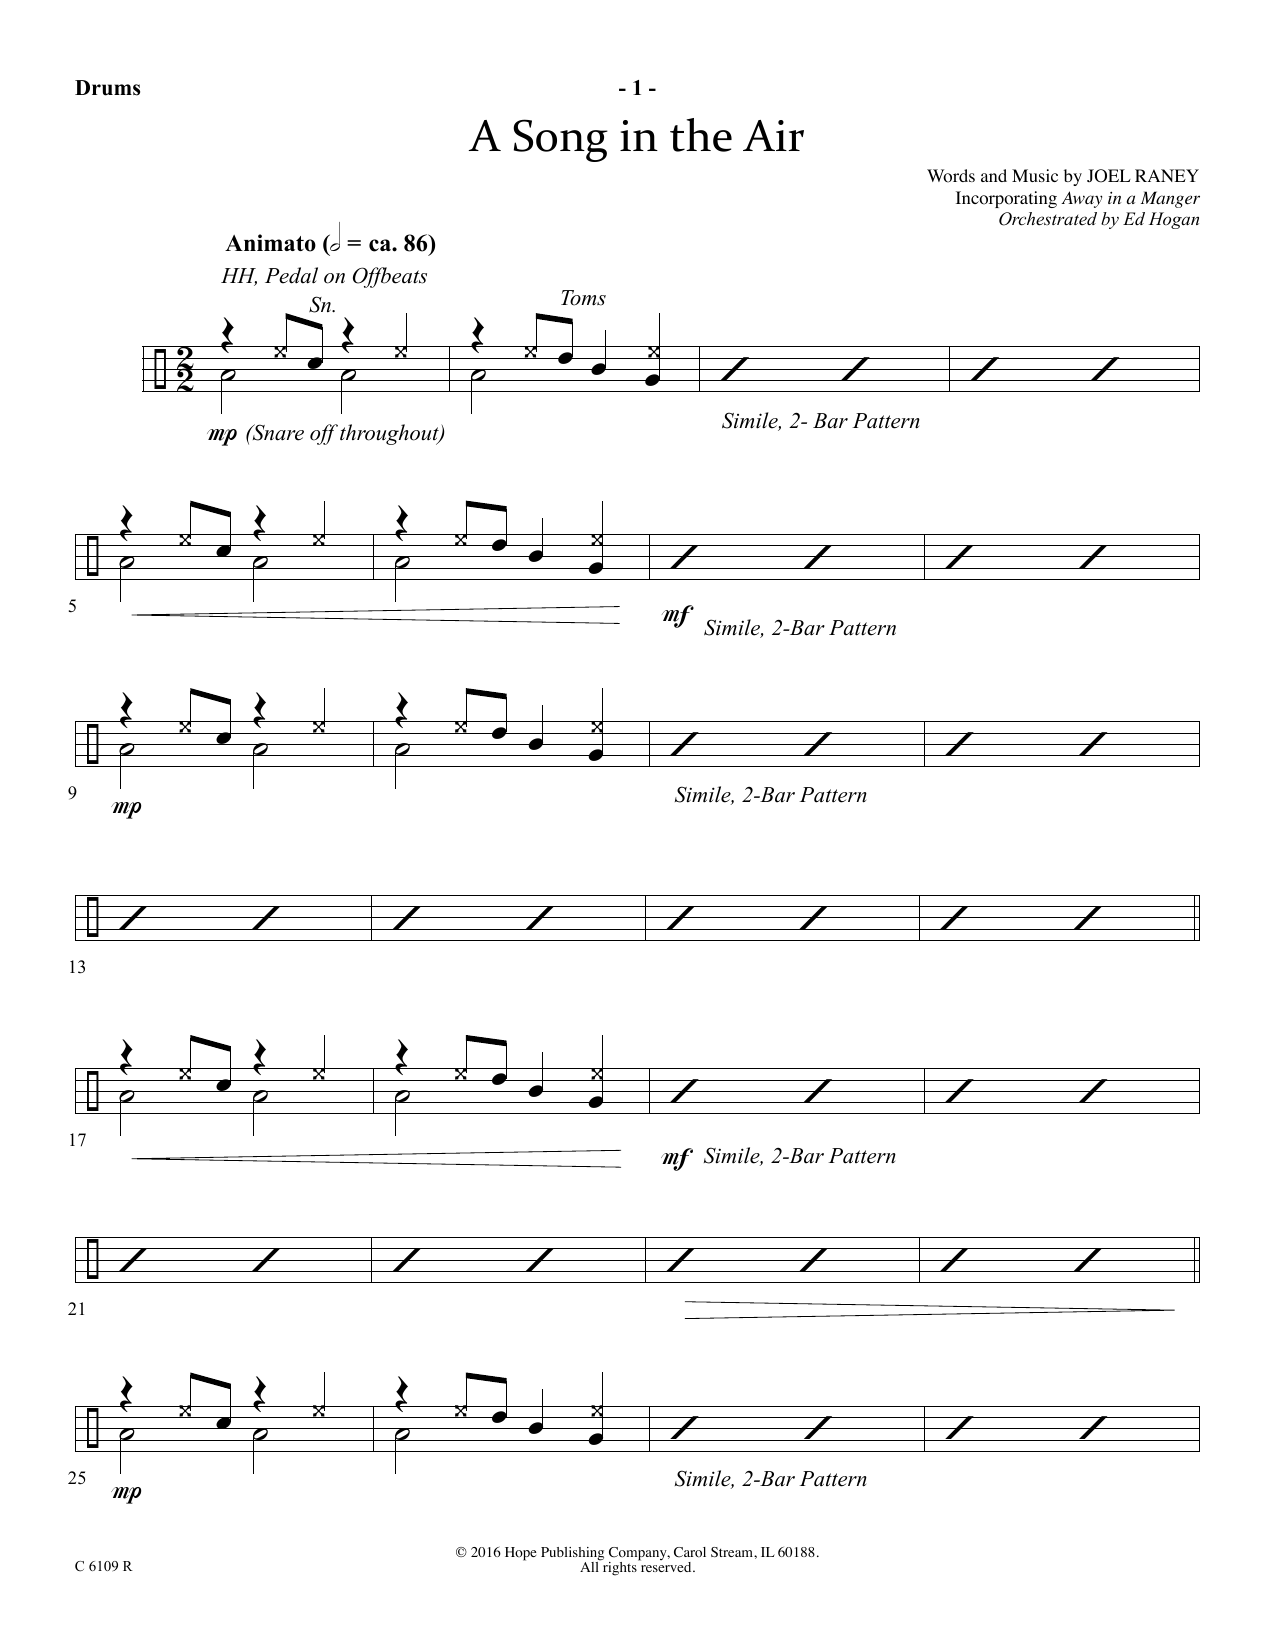 Download Joel Raney A Song In The Air - Drums Sheet Music